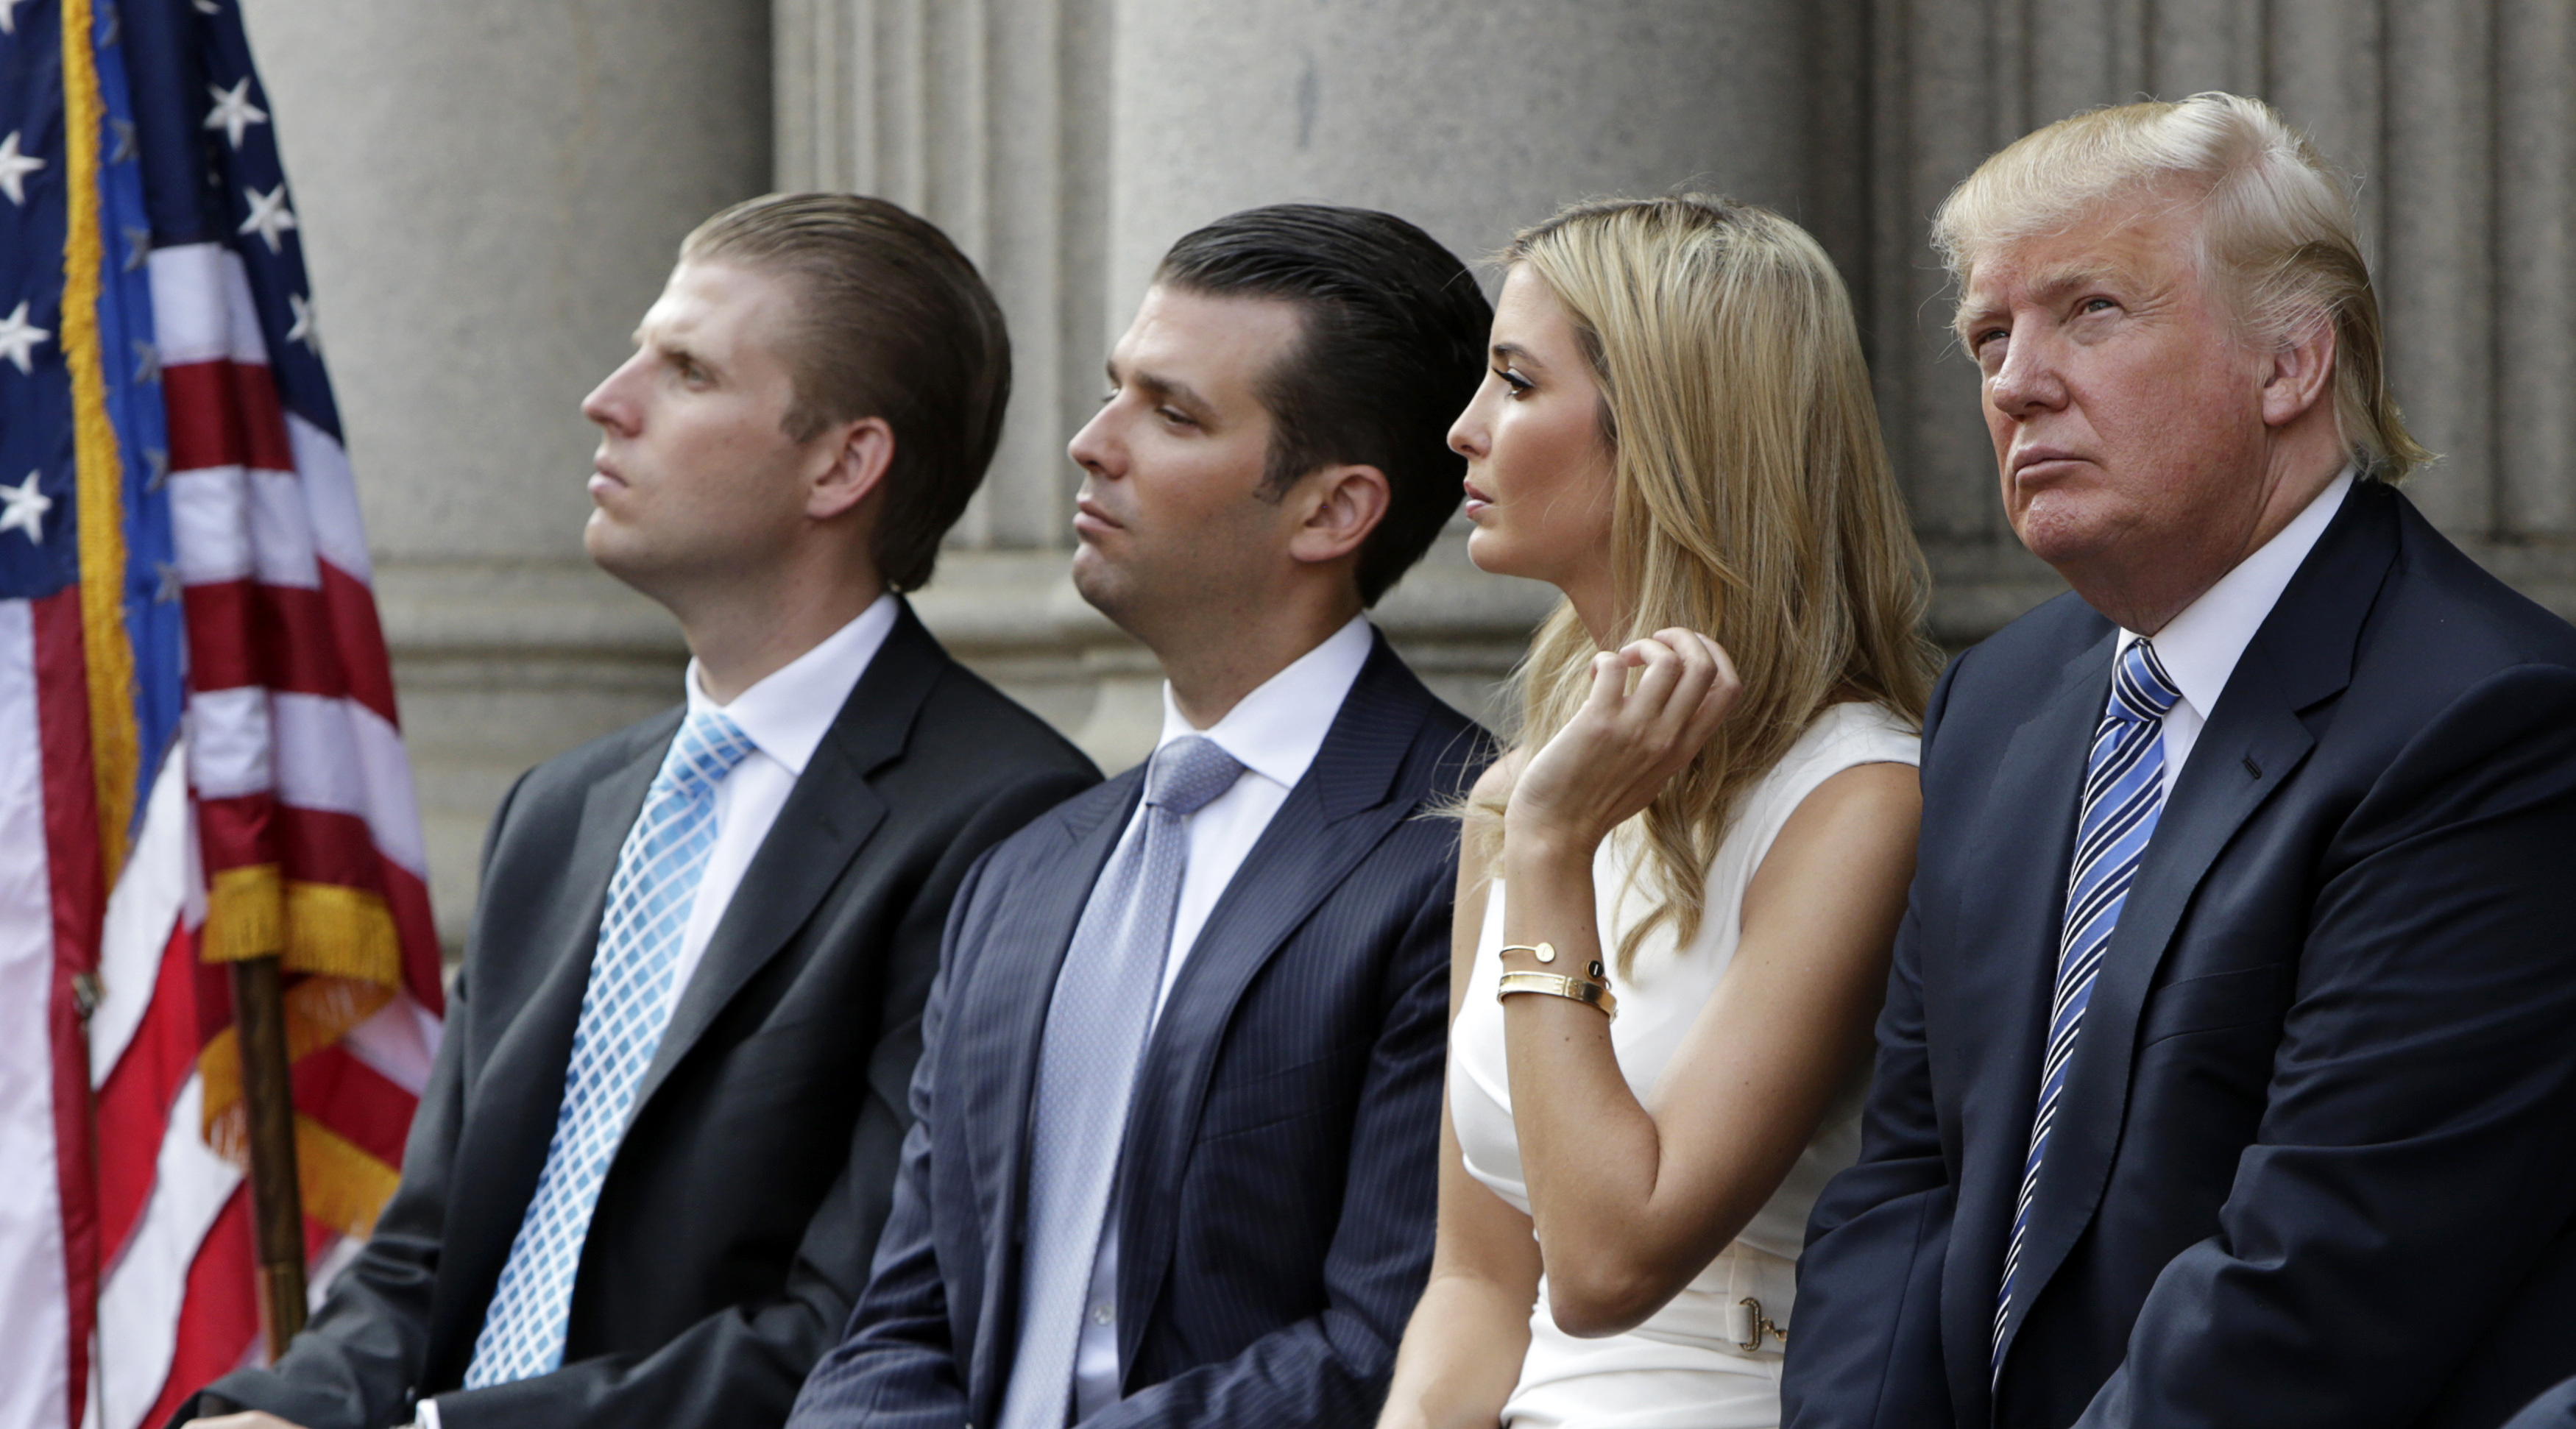 Trump family attends ground breaking of new hotel in Washington